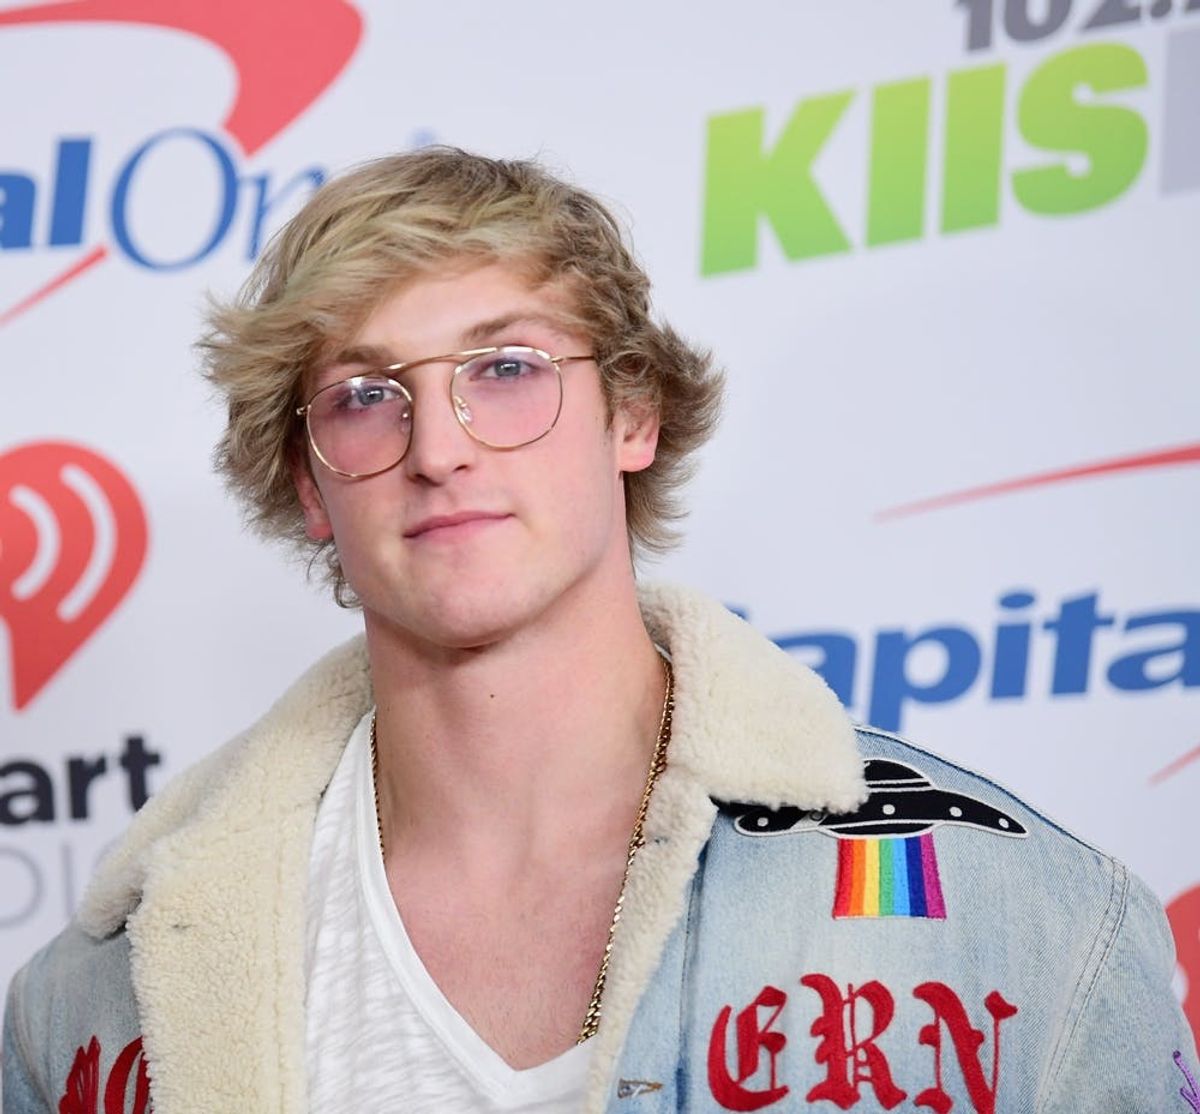 YouTube Cut Ties With Logan Paul: Here’s What Should Happen Next